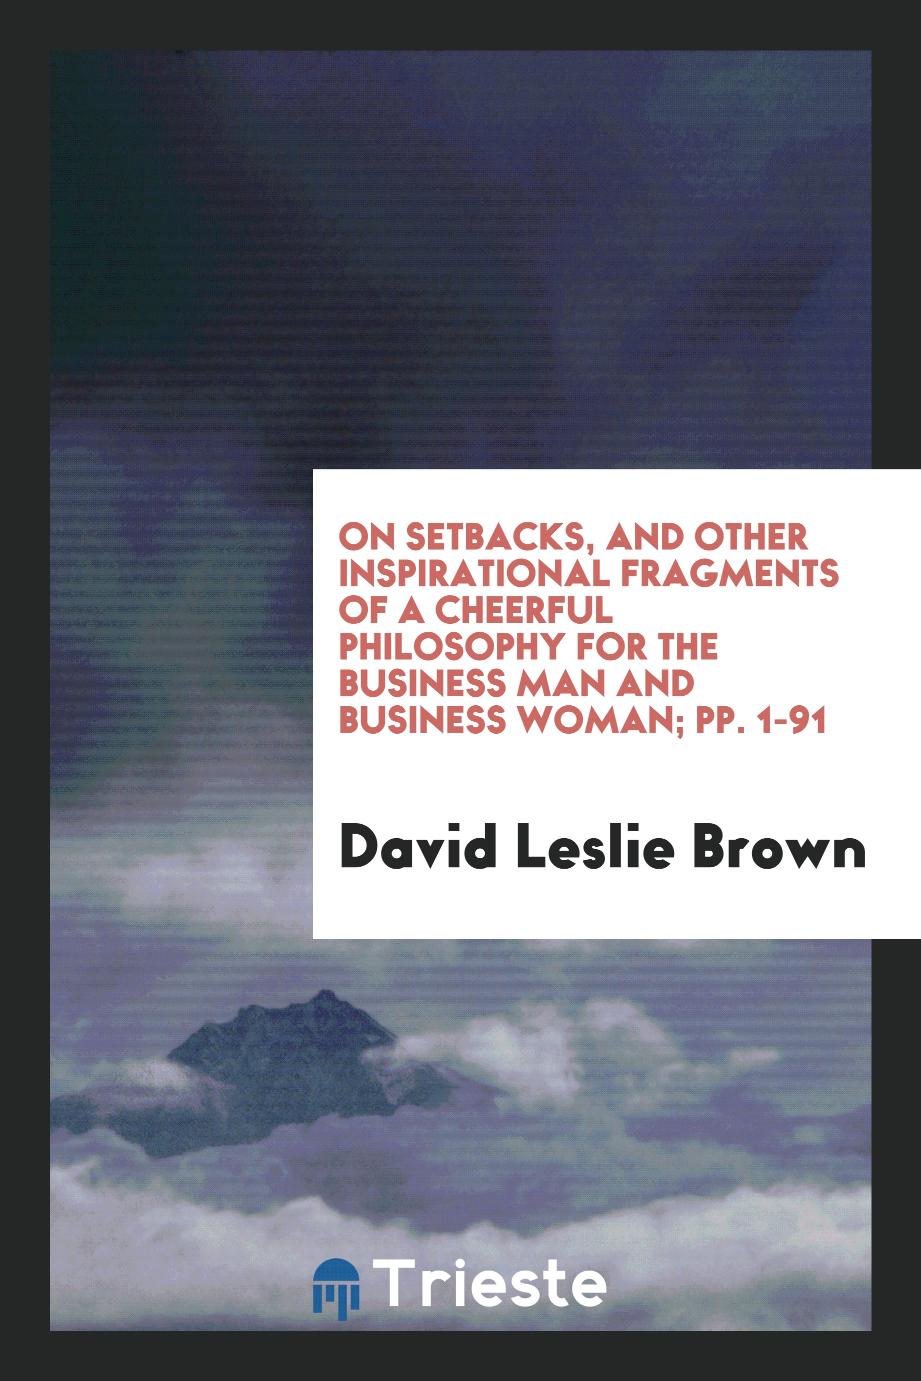 On Setbacks, and Other Inspirational Fragments of a Cheerful Philosophy for the Business Man and Business Woman; pp. 1-91